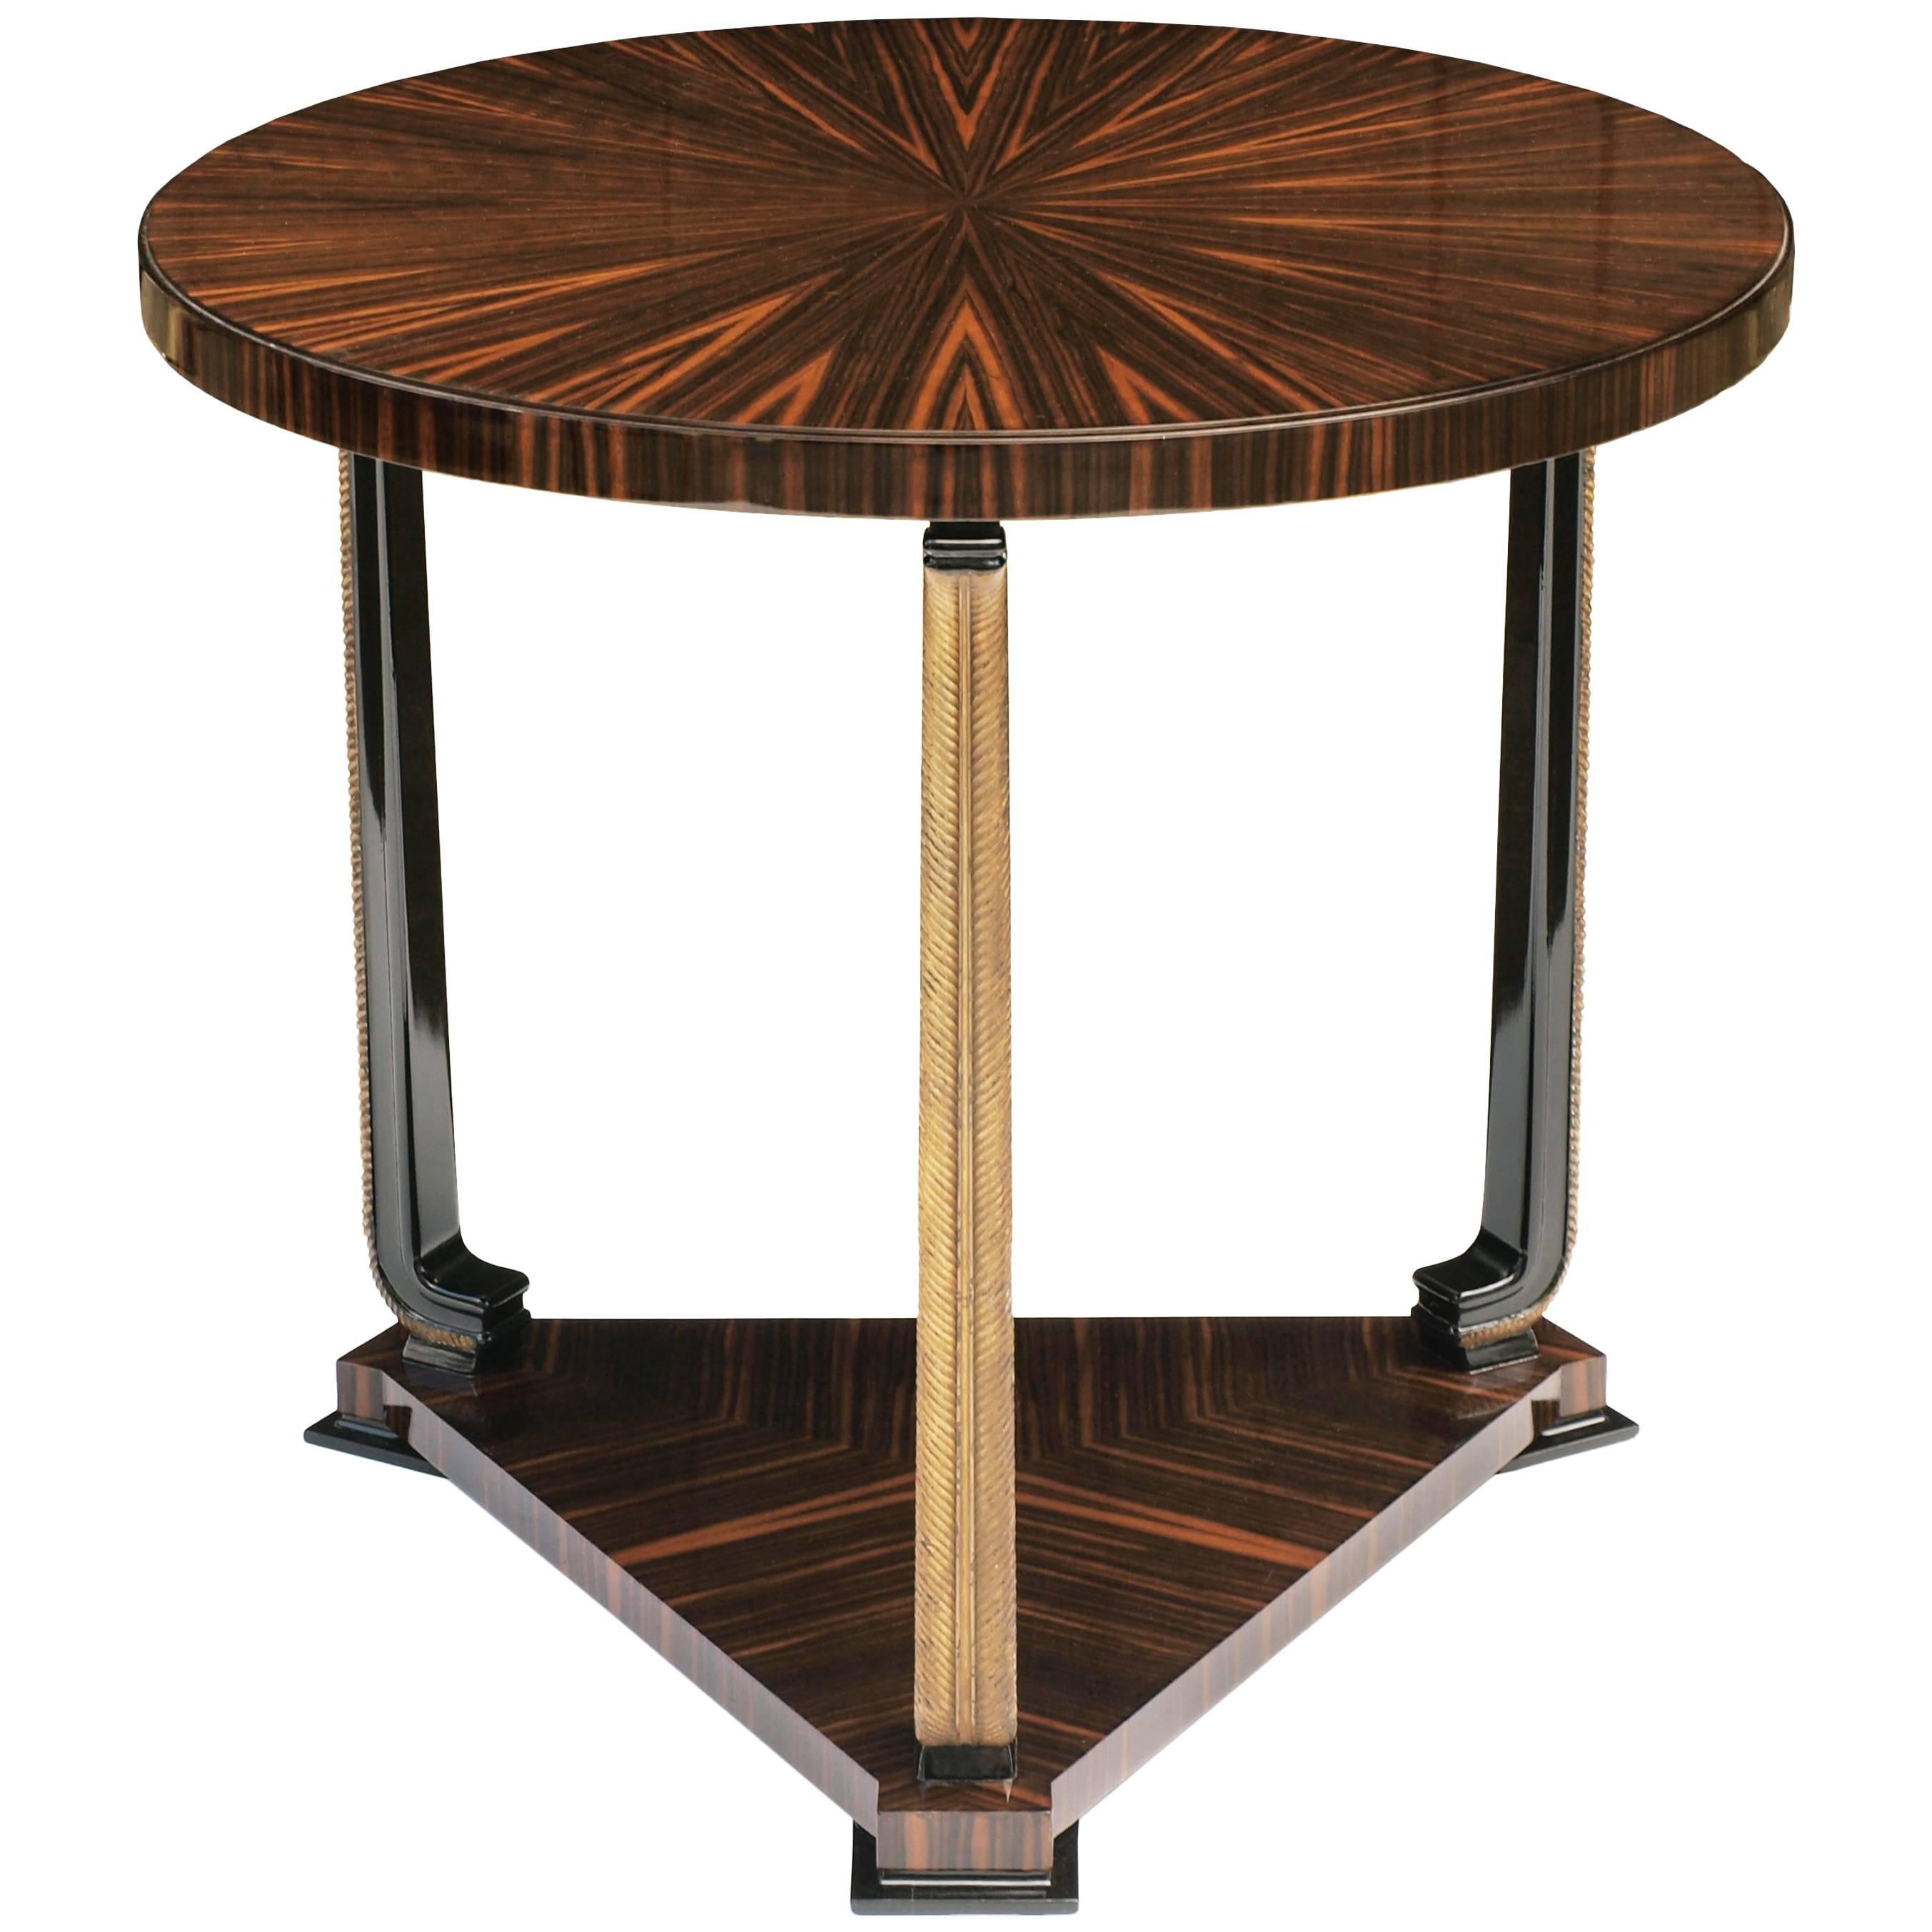 An exceptional ebony Macassar and parcel-gilt circular table by Axel Einar Hjorth for Nordiska Kompaniet, circa 1928.

The sunburst top is of matched ebony Macassar with a stepped fashion edge, supported by three carved parcel-gilt palm shaped legs